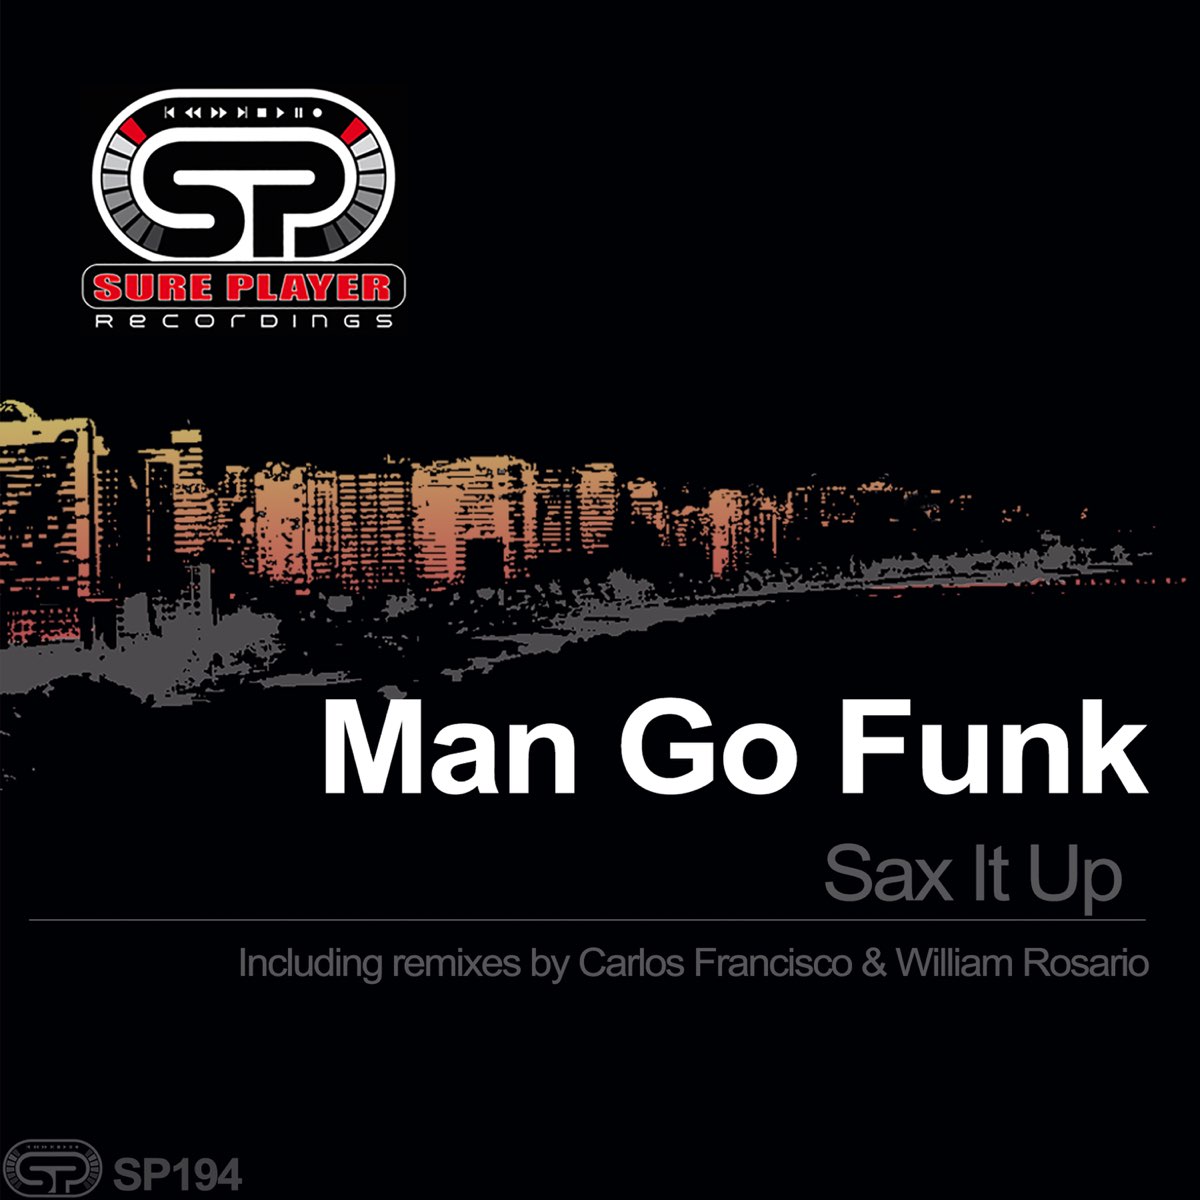 Funked up remix. Funky Gogo. Funk it up.